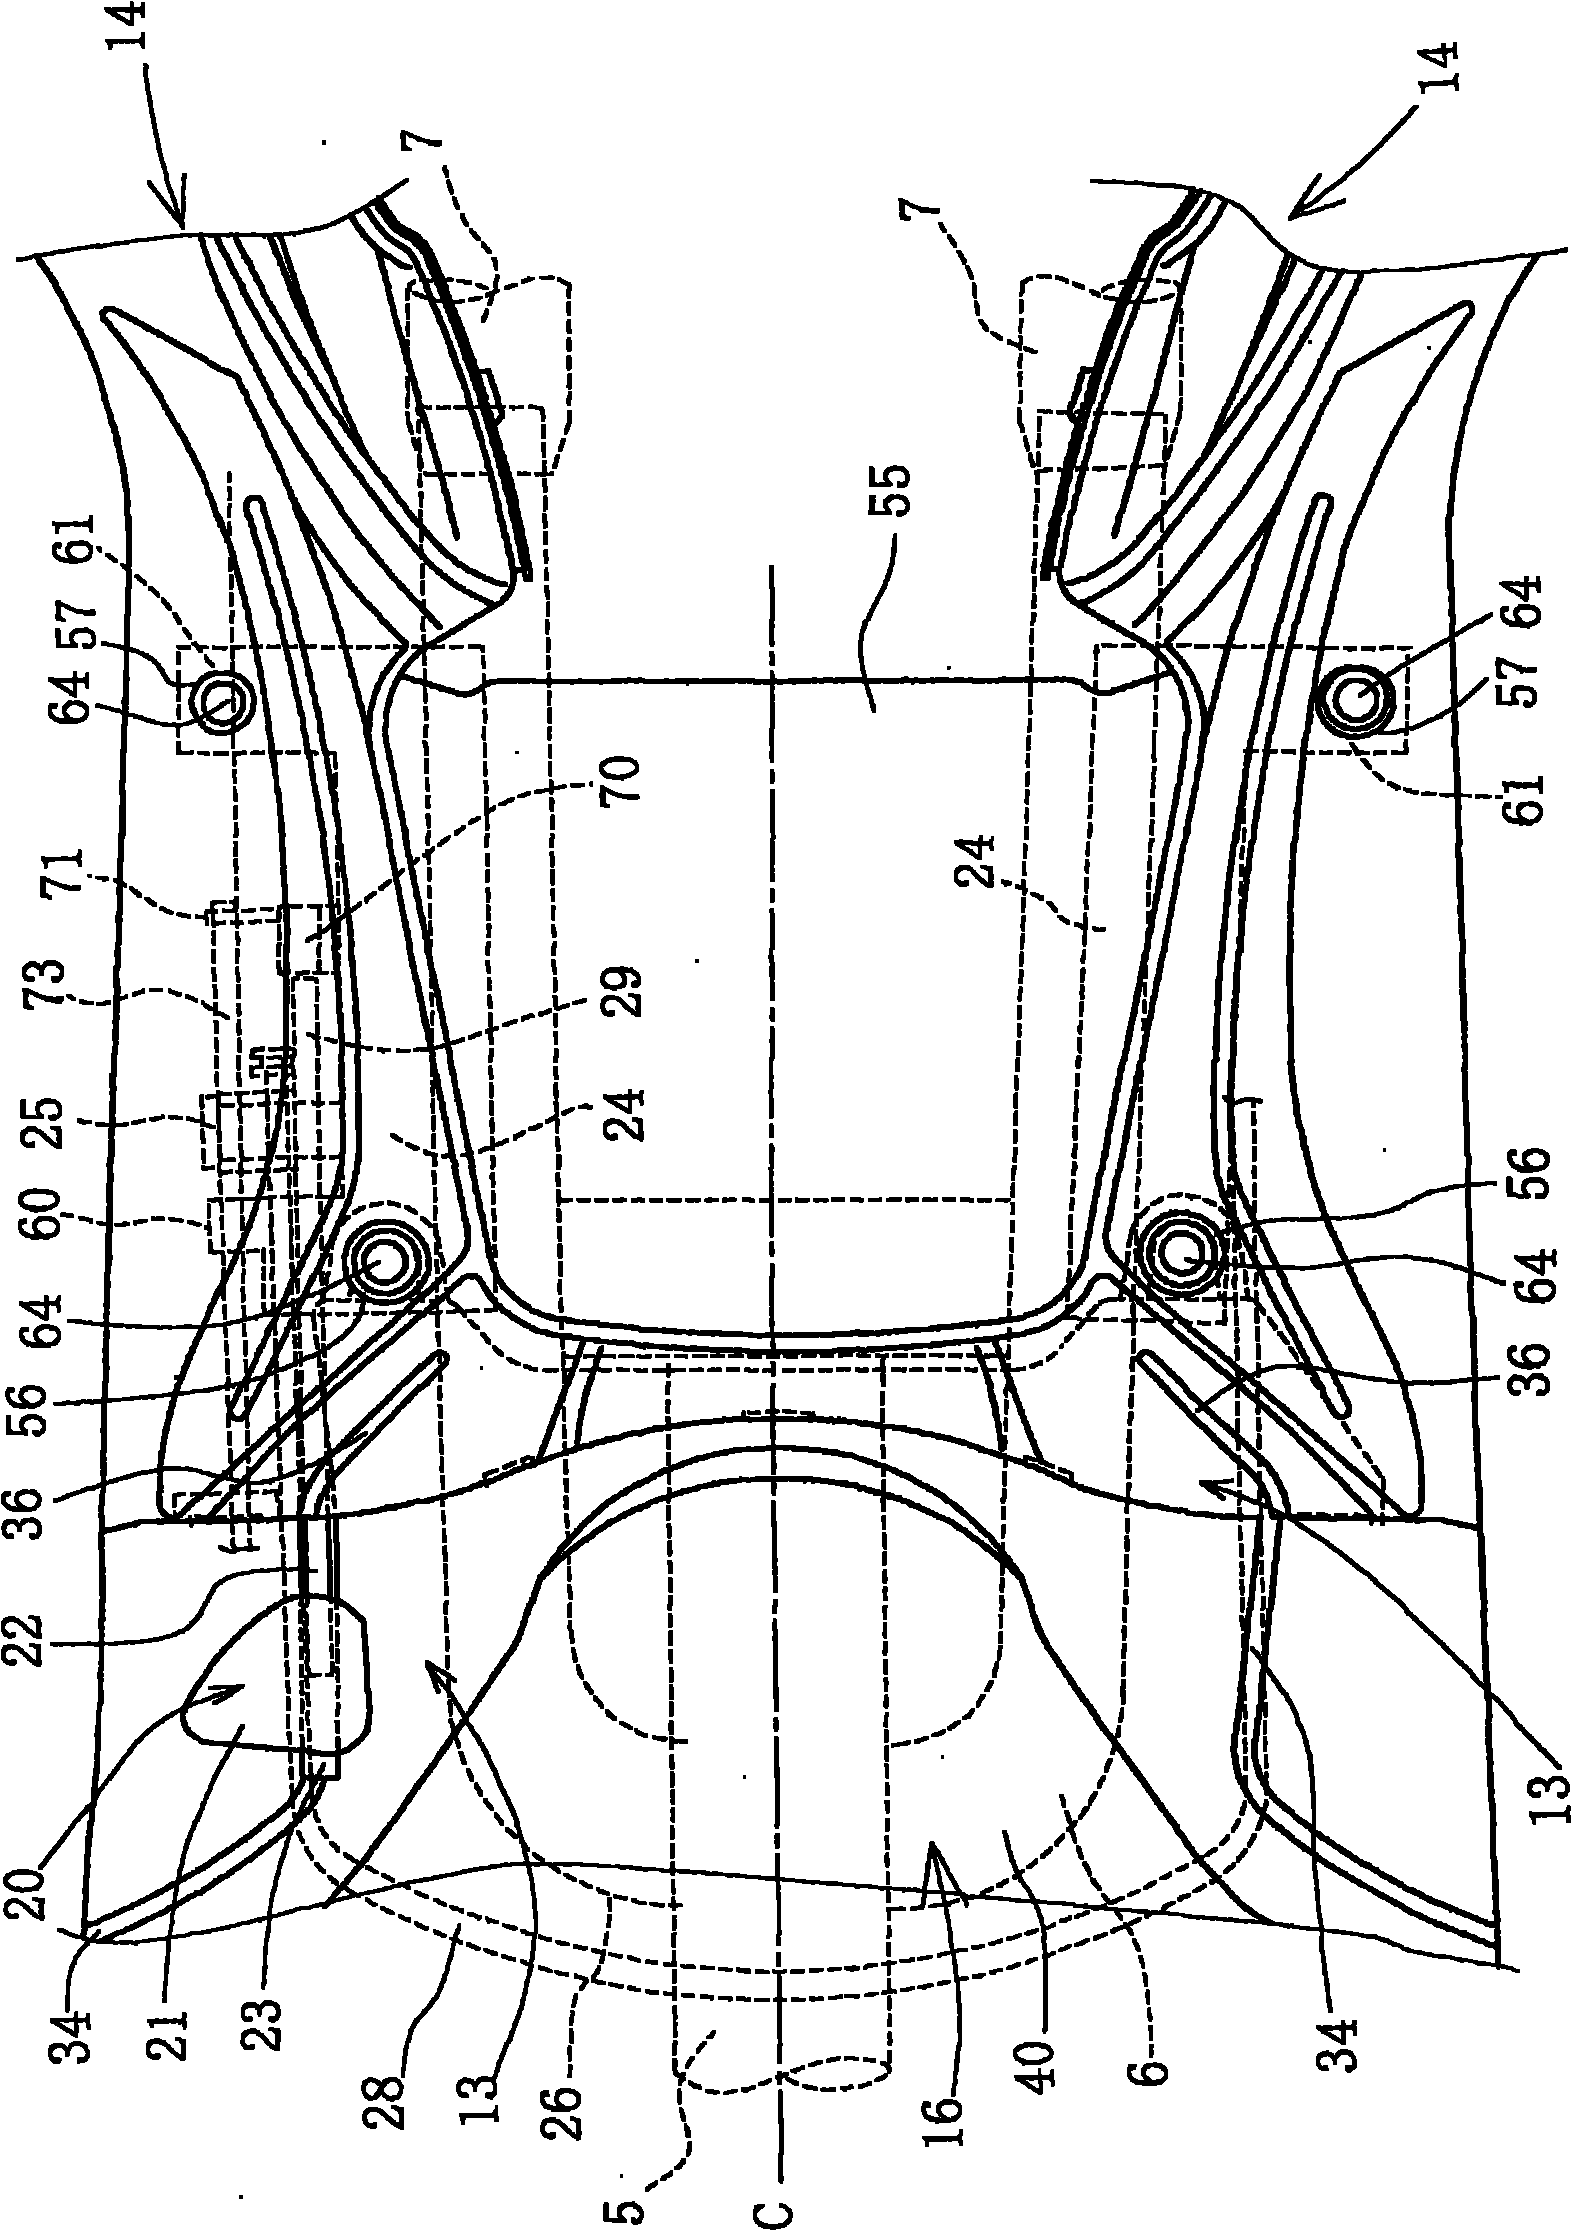 Pedal bottom plate structure